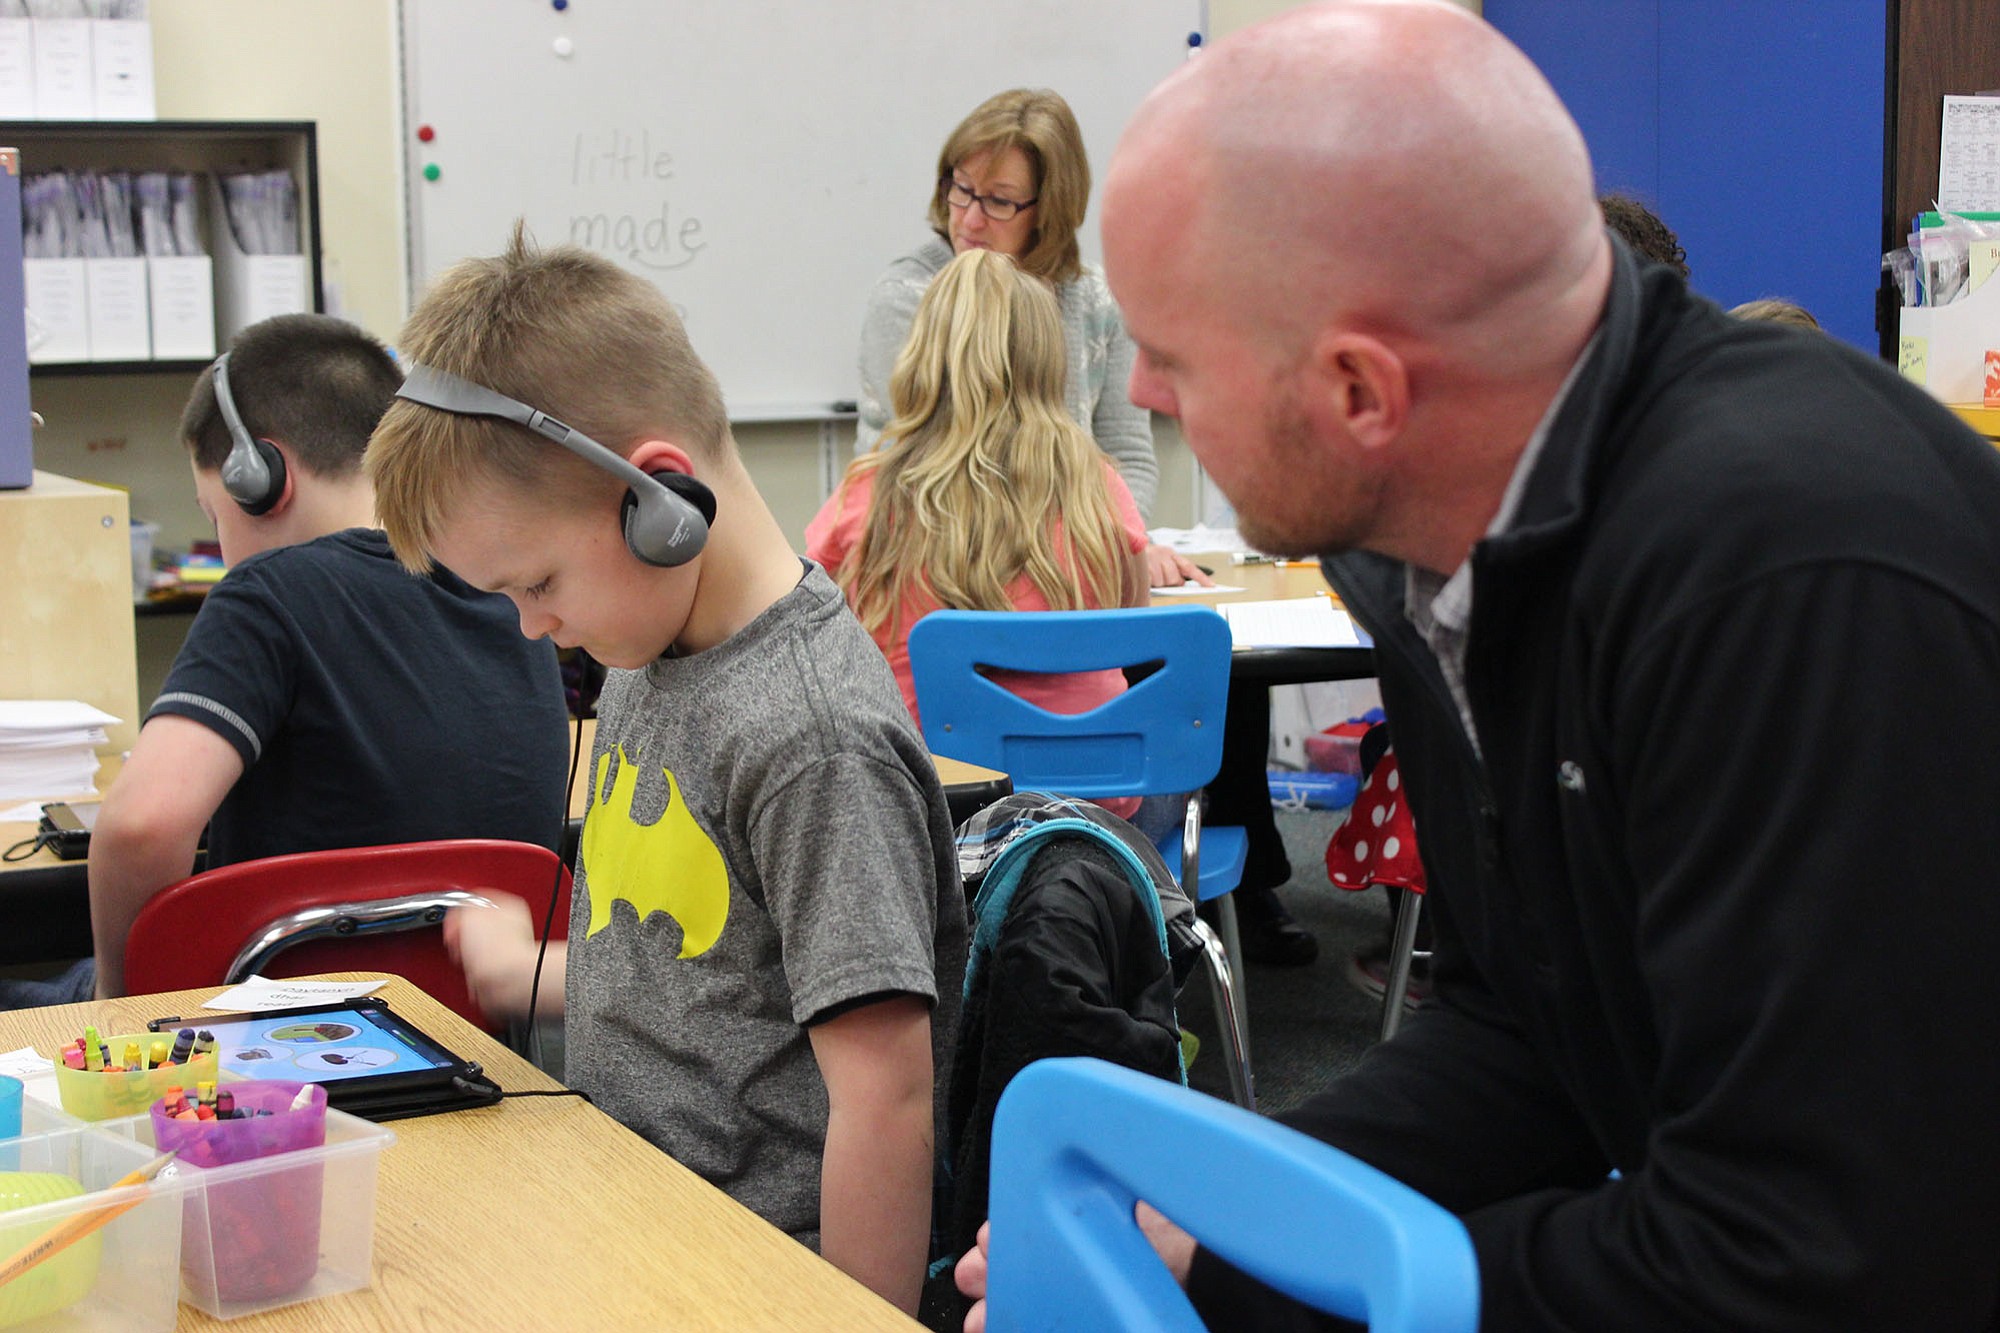 North Image: First-grade classes at North Image Elementary School received a donation of four iPad Minis from civil engineering firm MacKay Sposito, which the school will use as part of its reading program.